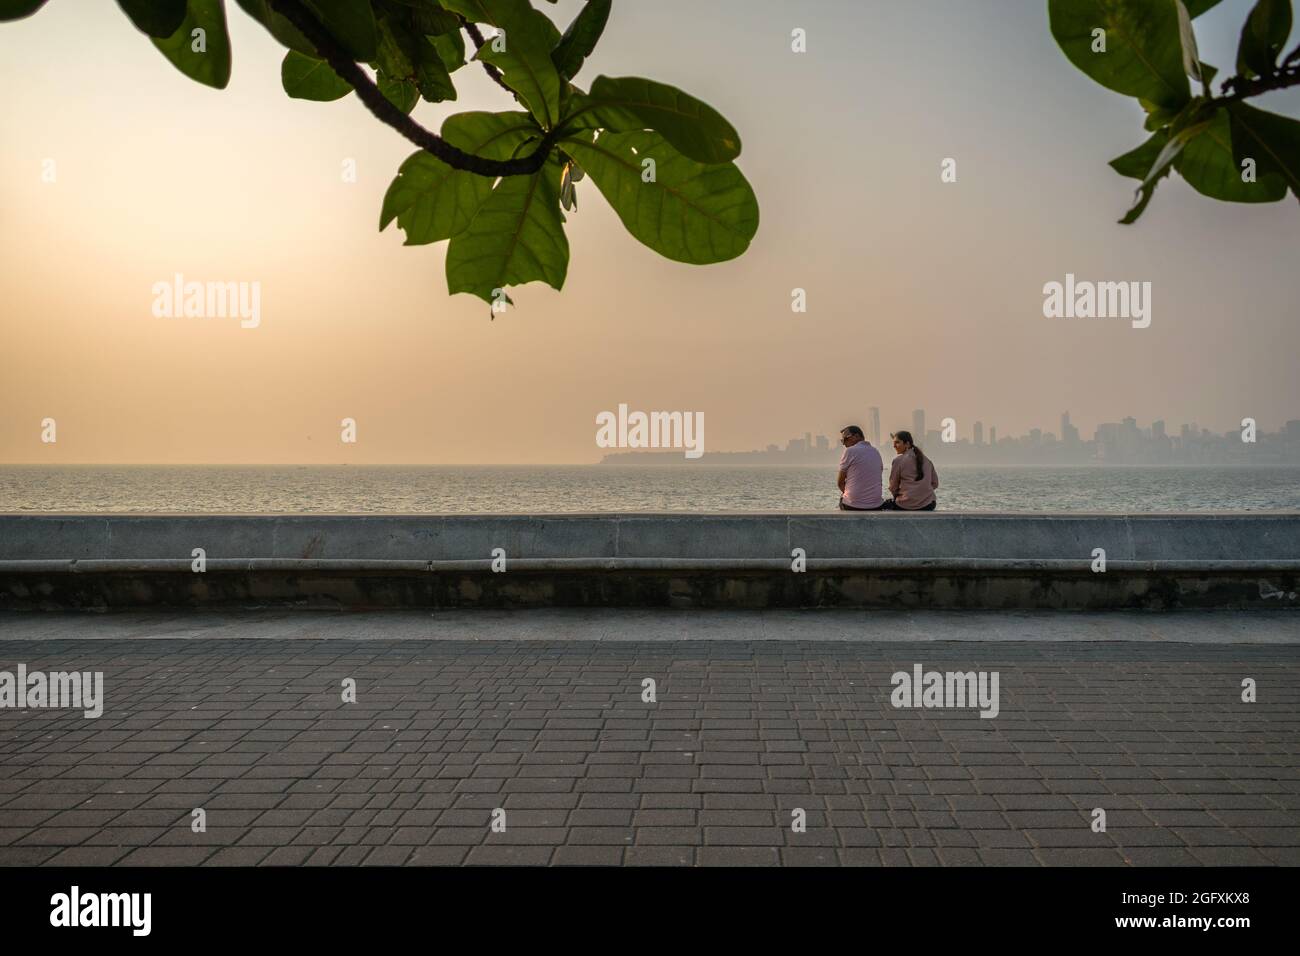 Mumbai, Maharashtra, India - 20 Nov 2019: A couple sitting and enjoying the sea view in the late evening with the sun setting at Nariman Point in Mumb Stock Photo